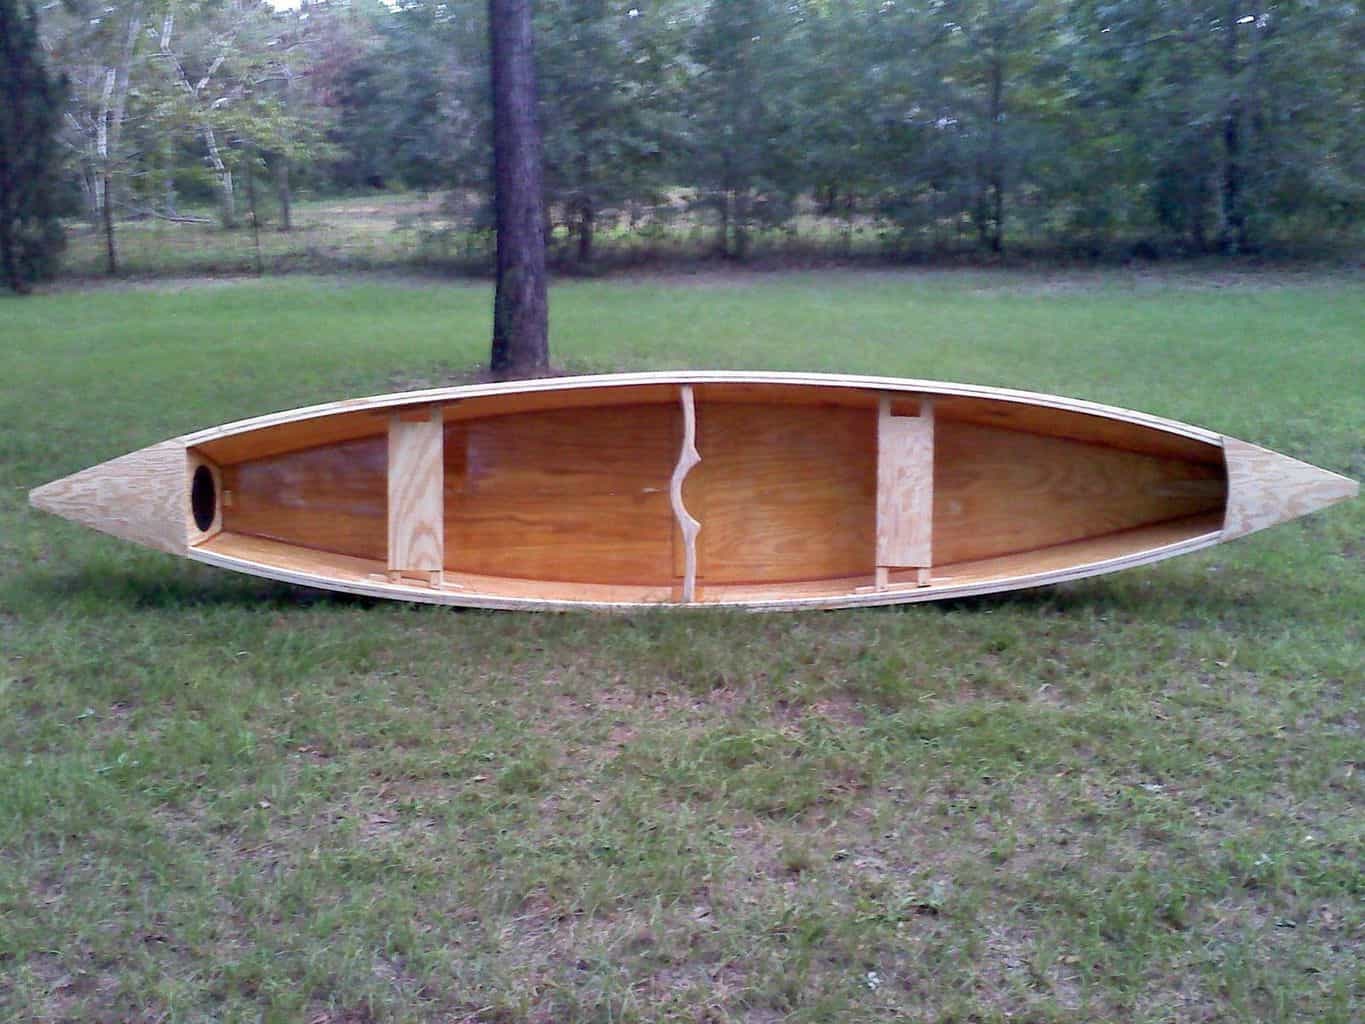  in a simple plywood canoe. | Storer Boat Plans in Wood and Plywood